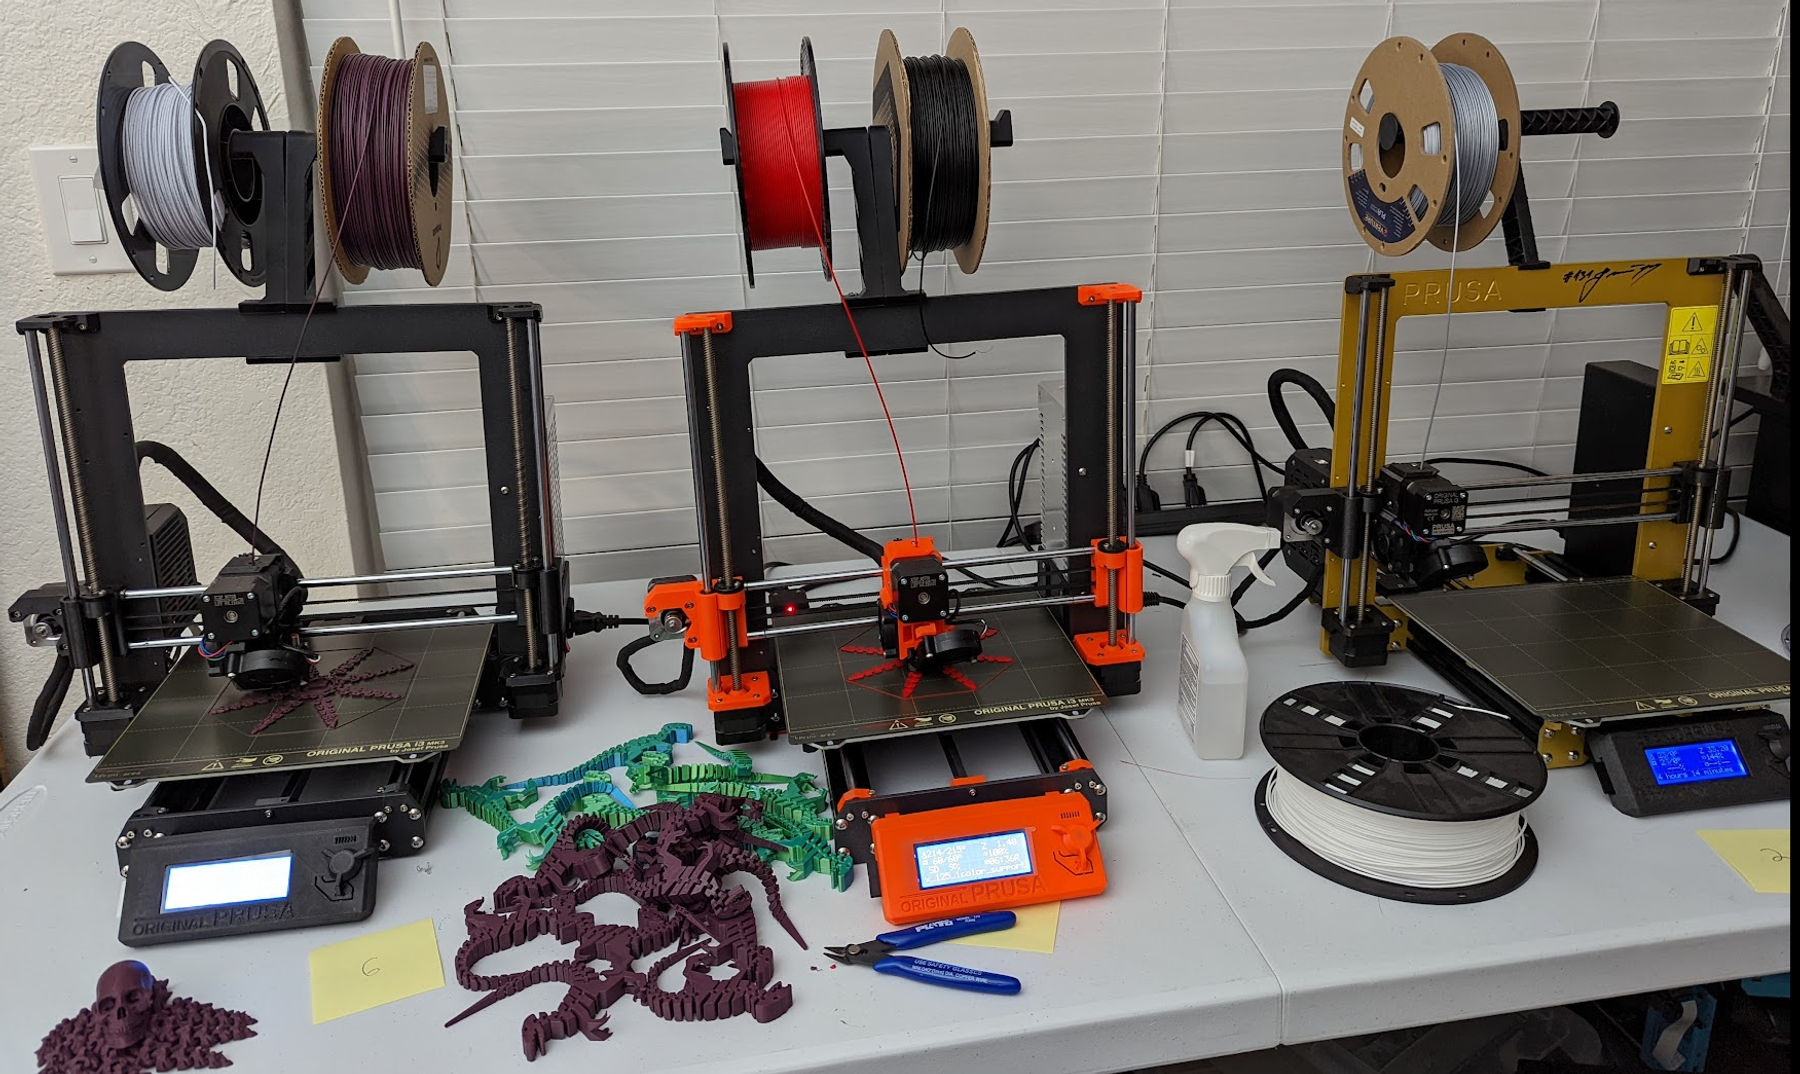 Pre-printing 3 dabs - 3D Fabrication - Dallas Makerspace Talk